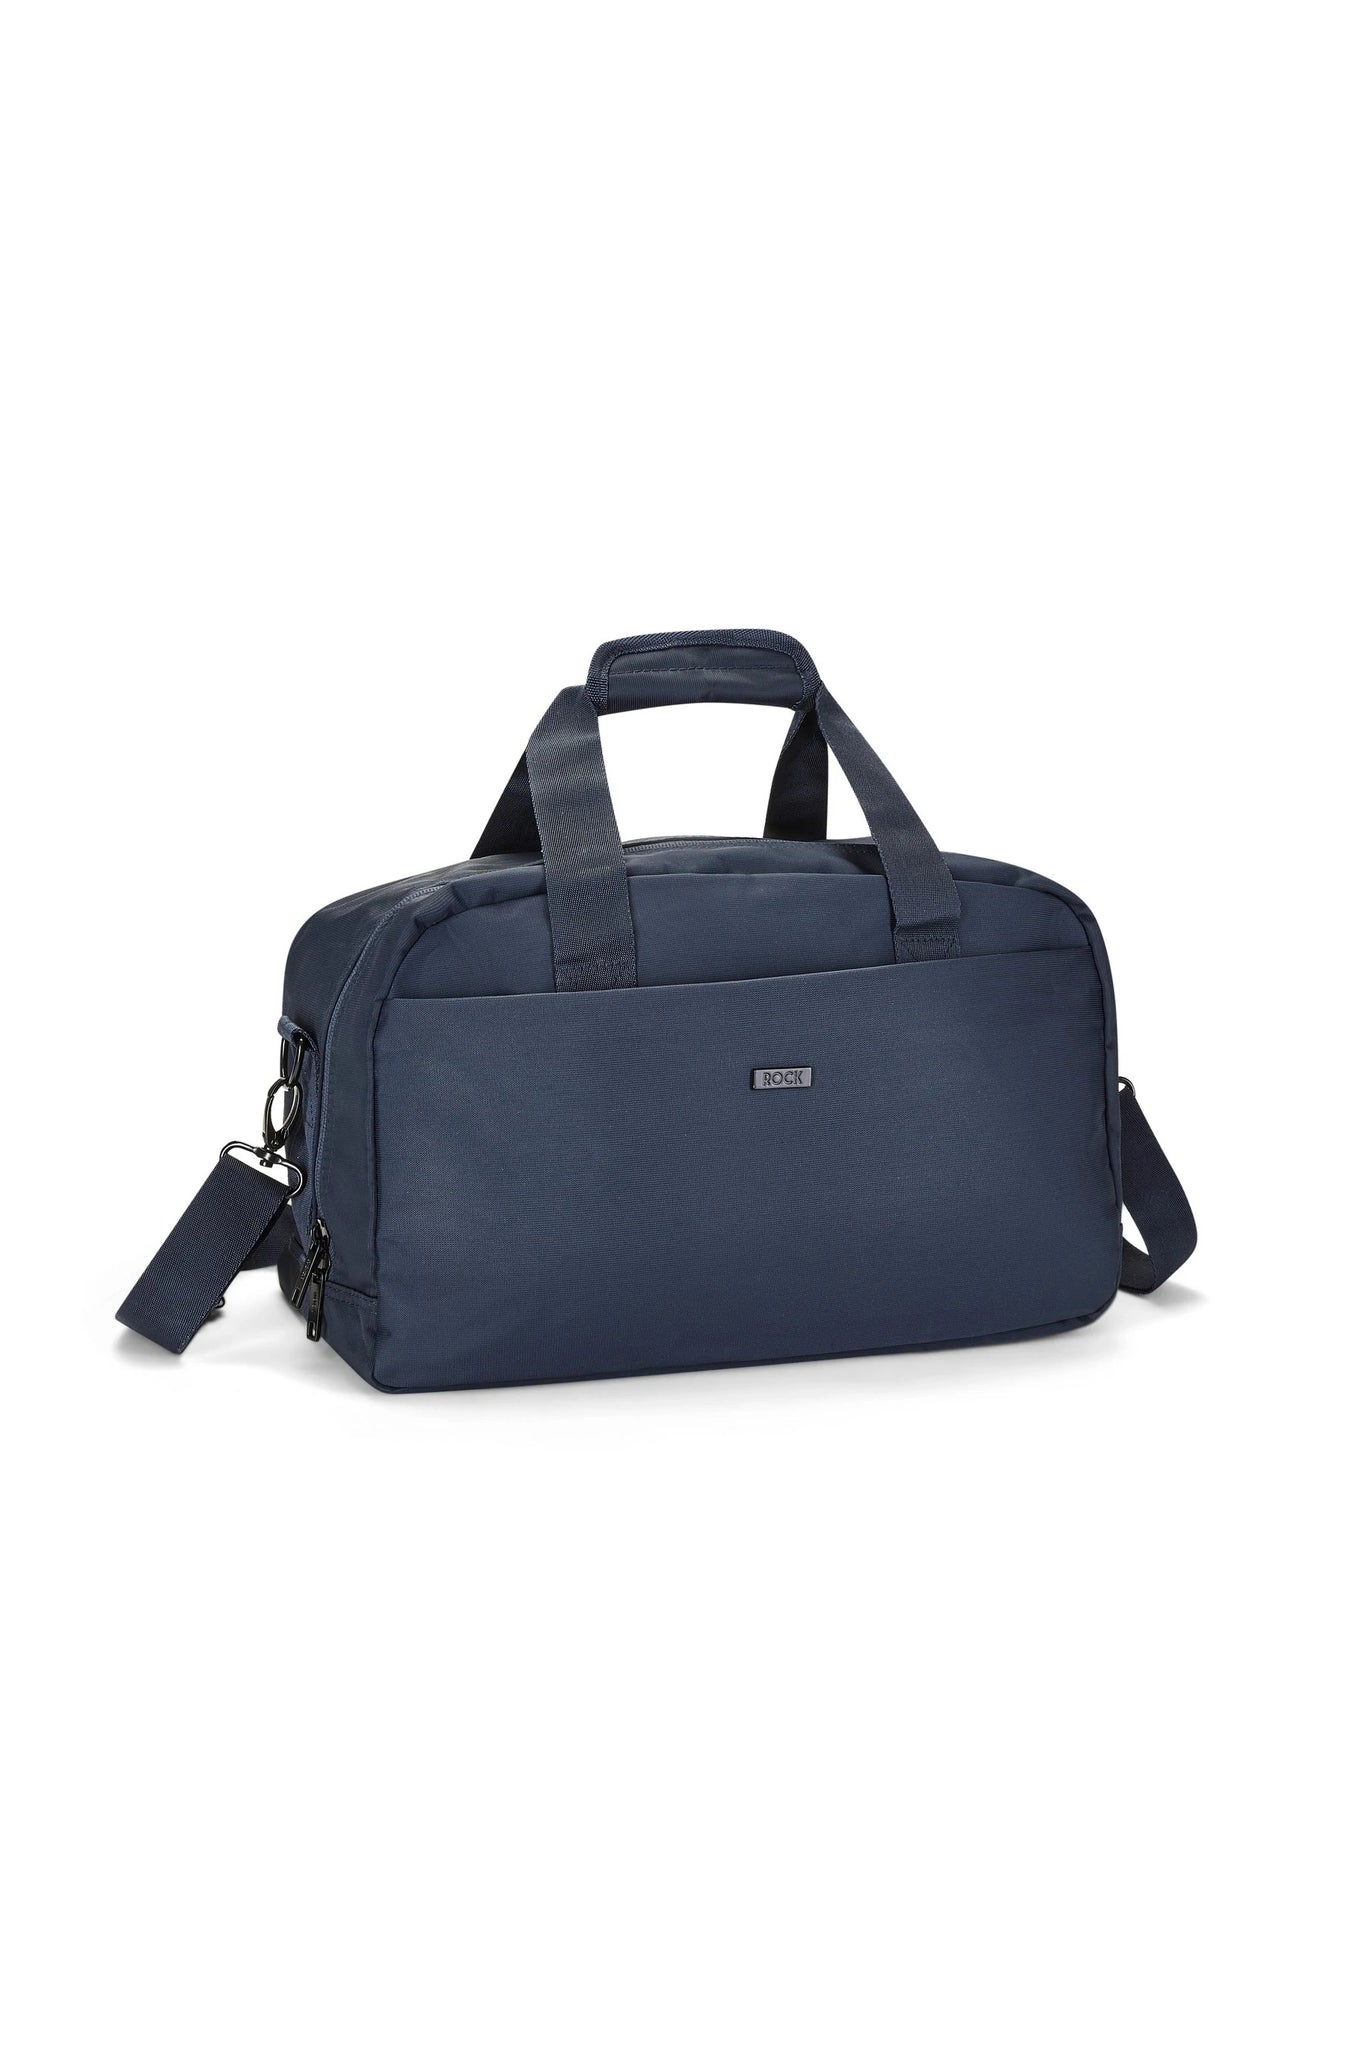 Travel Holdall Ryan Air Compatible